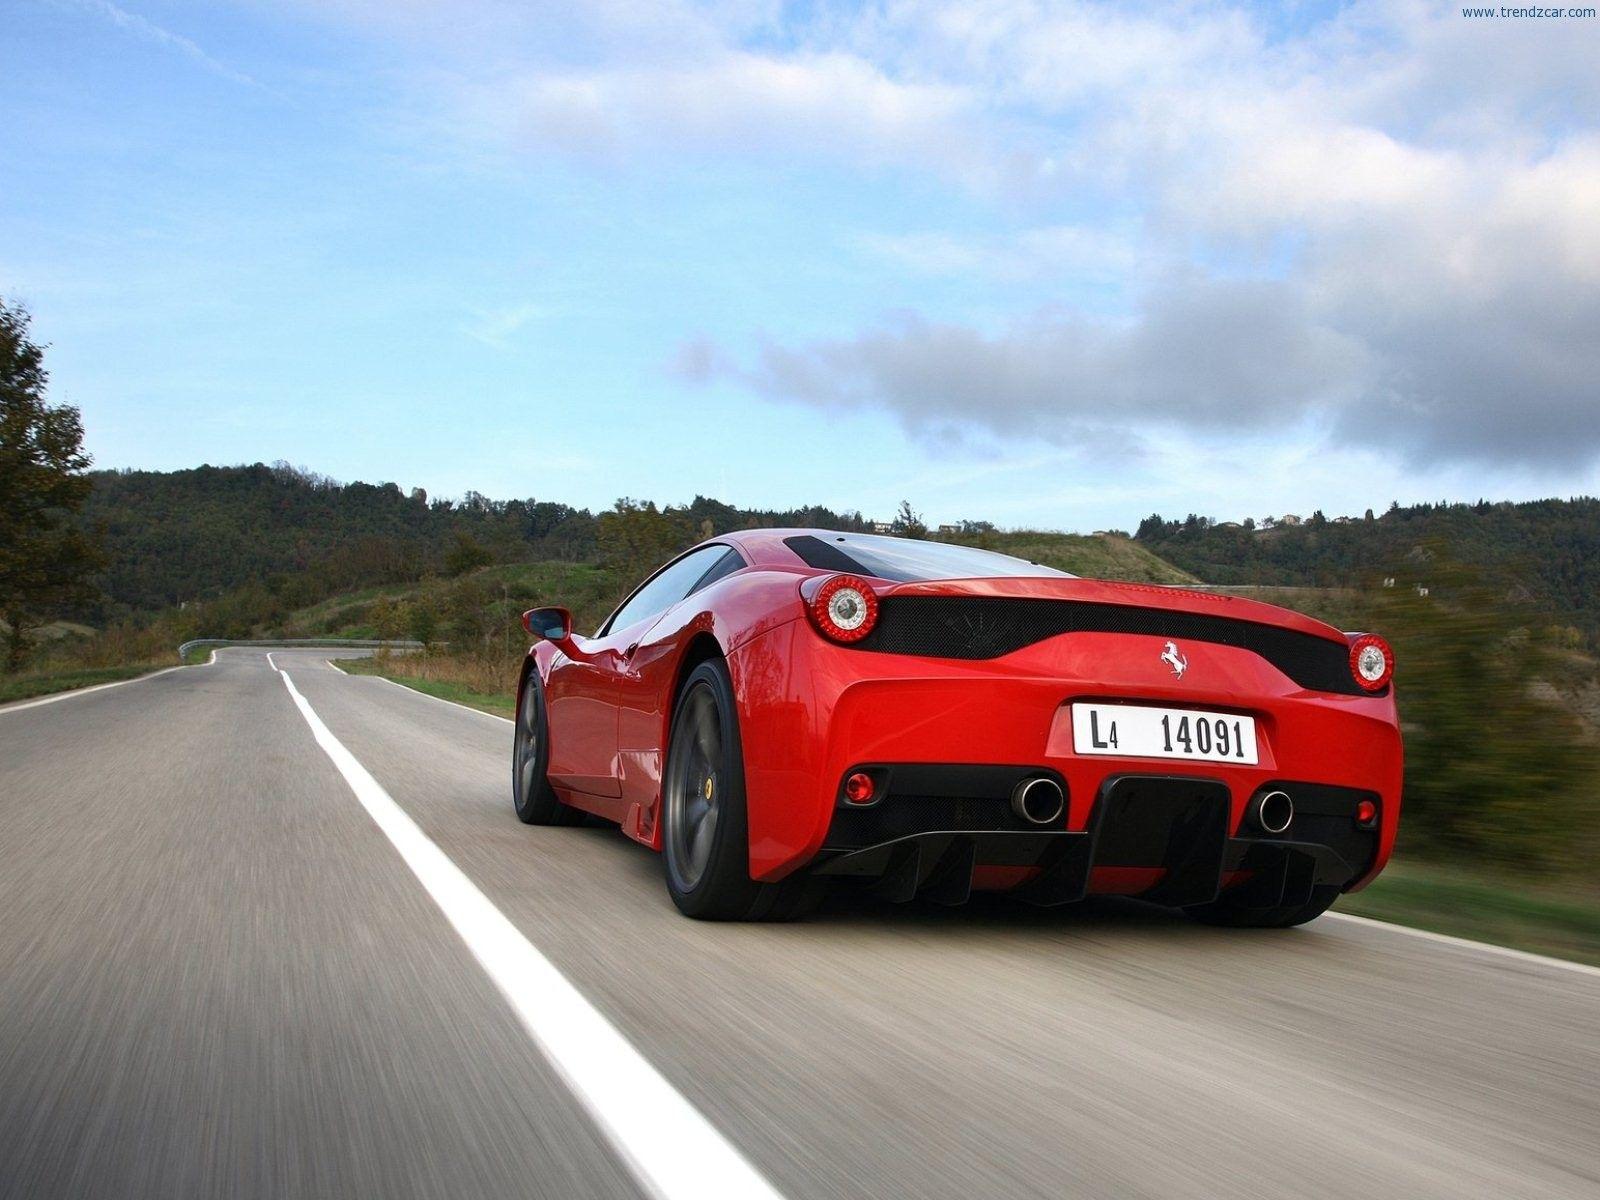 Ferrari 458 Speciale Specs, Price and Review. Best Tech Cars